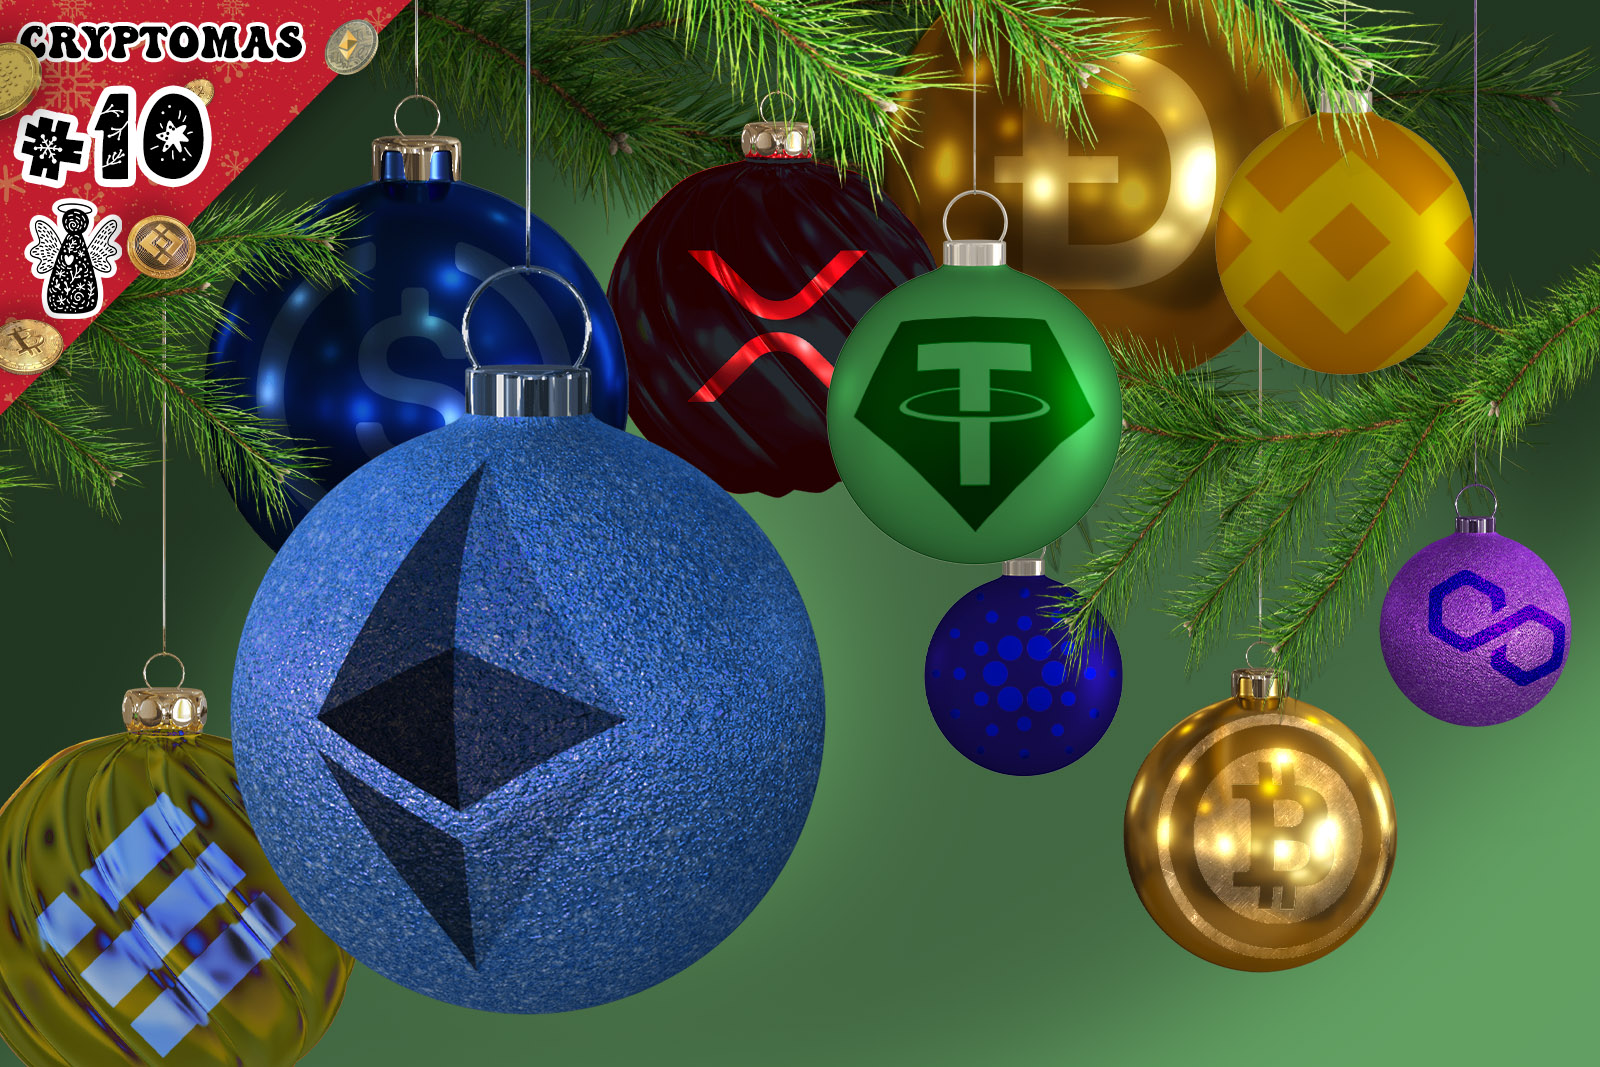 A Christmassy top corner denotes "Cryptomas #10". The central image shows christmass tree baubles with the logos of top cryptos.